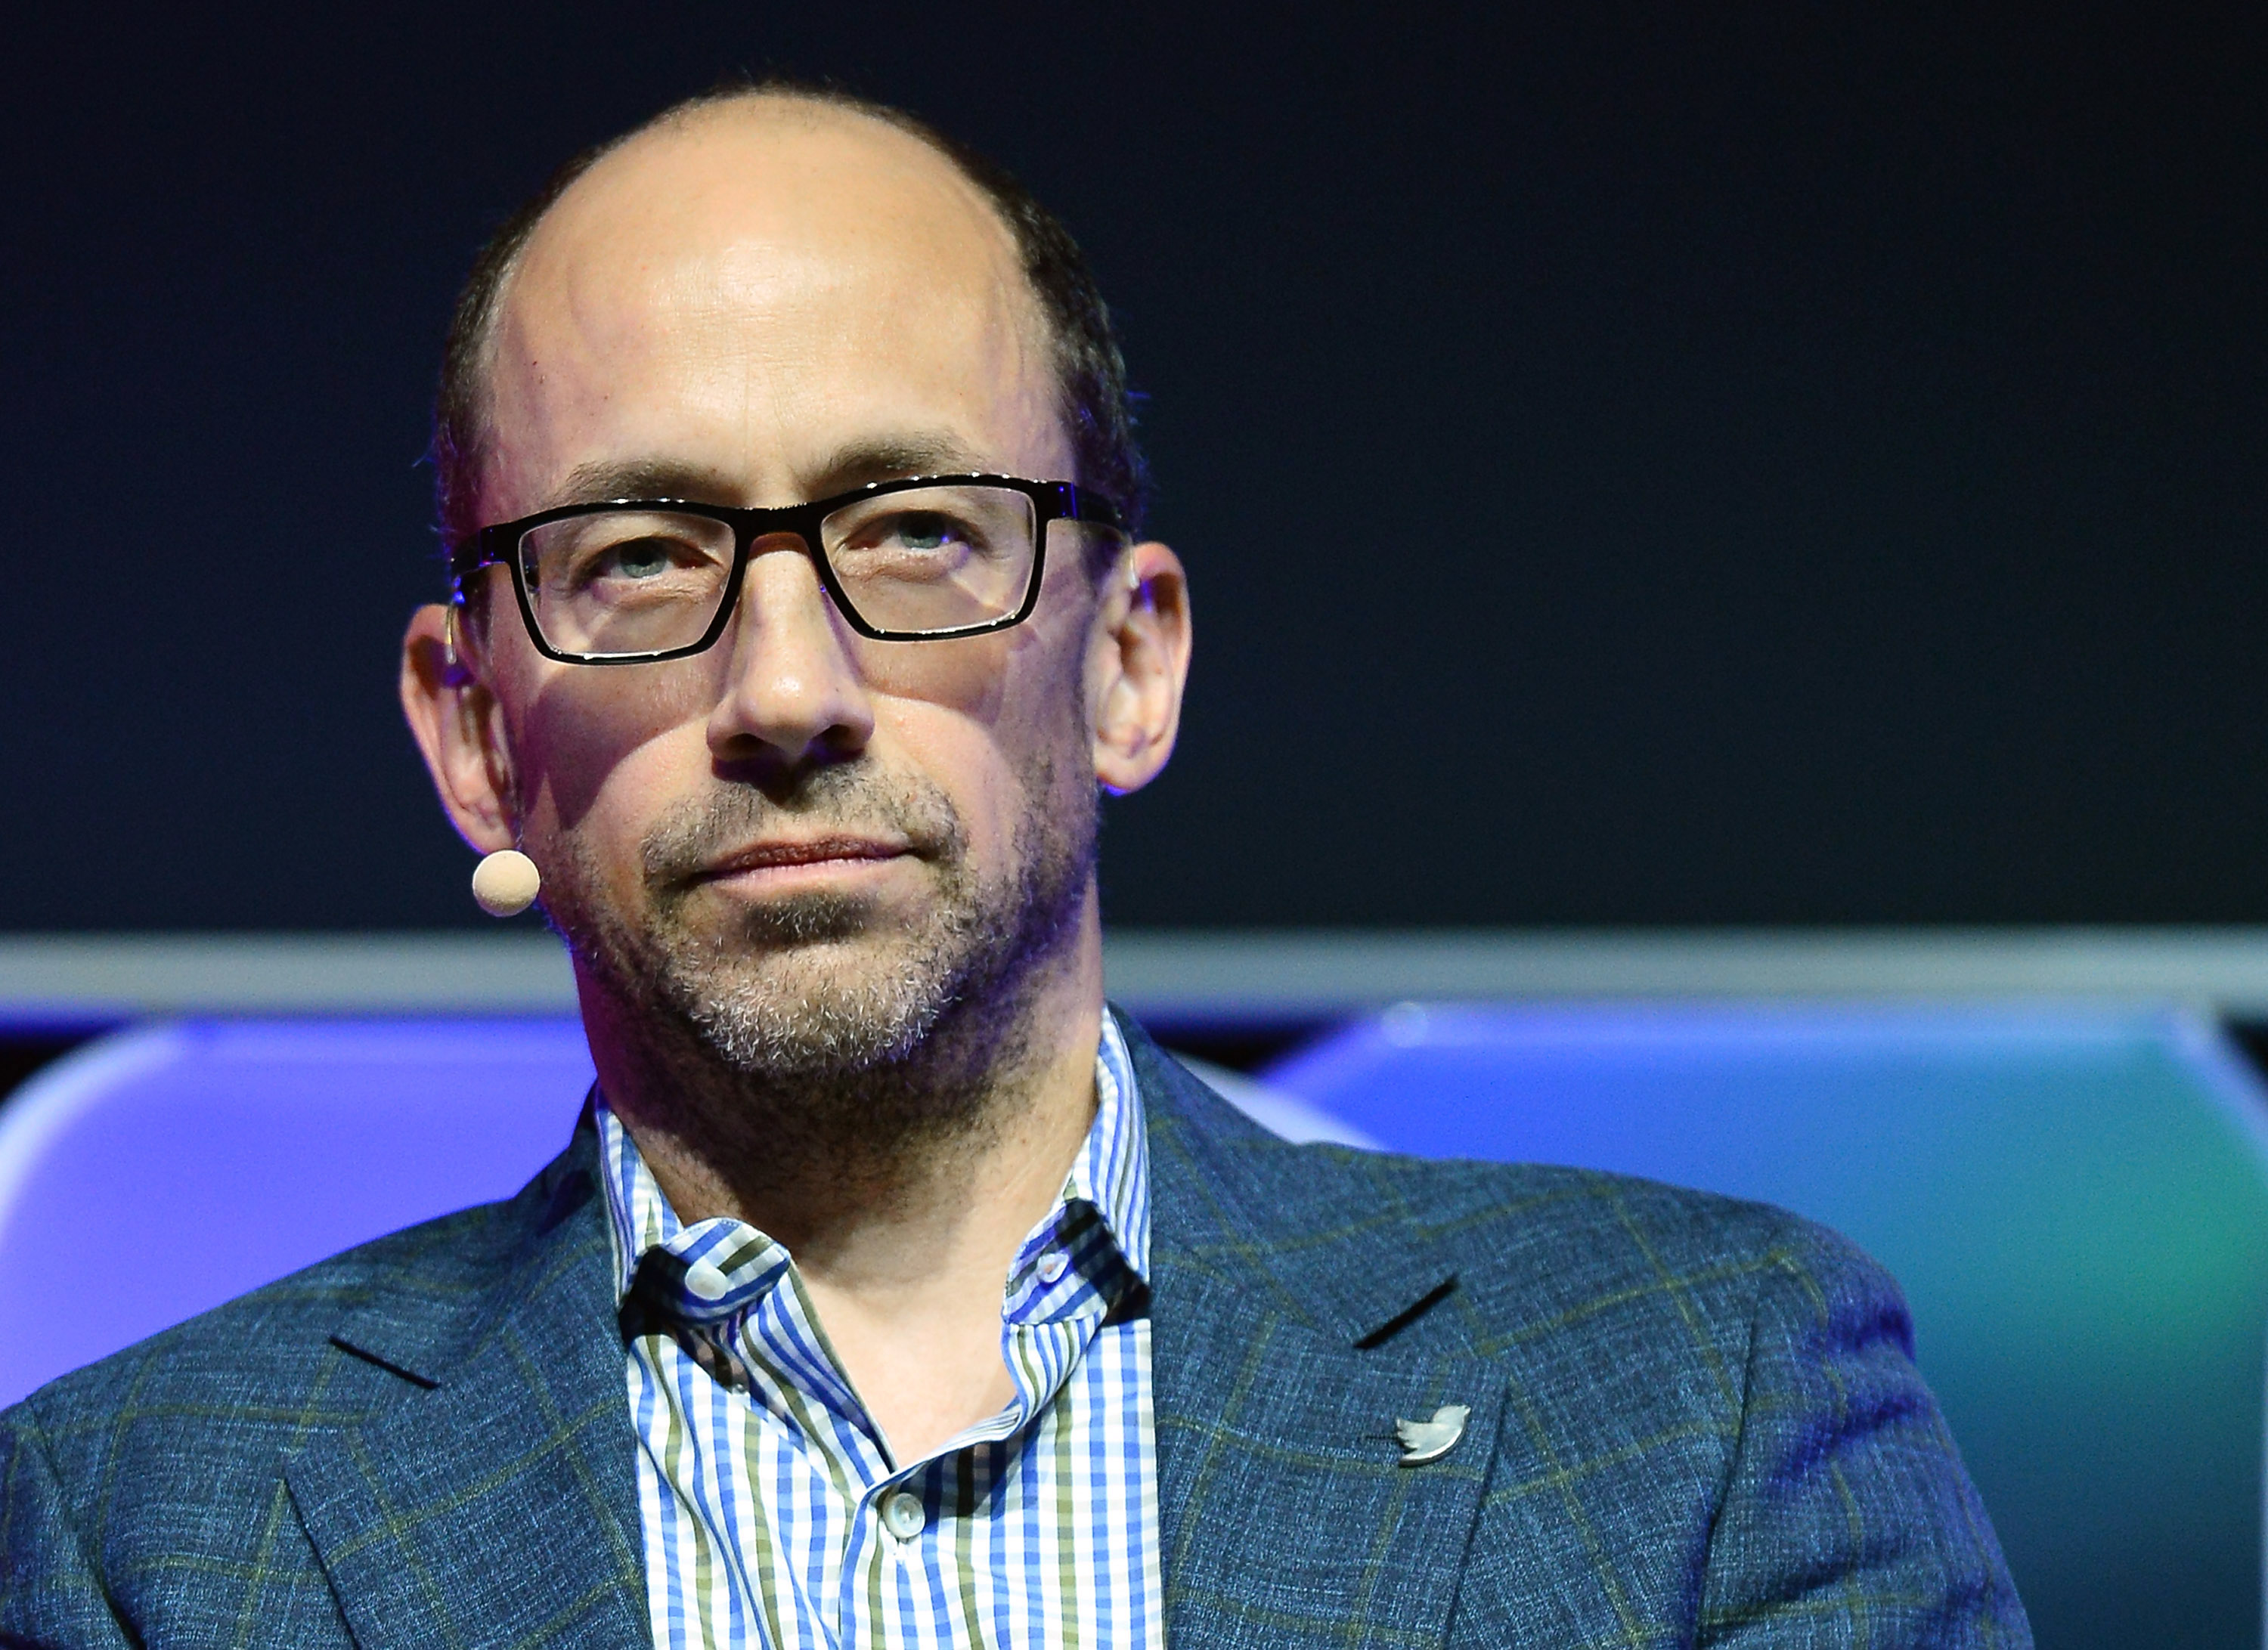 Twitter CEO Dick Costolo speaks during the Brand Matters keynote address at the 2014 International CES at The Las Vegas Hotel &amp; Casino on January 8, 2014 in Las Vegas, Nevada. (Ethan Miller&mdash;Getty Images)